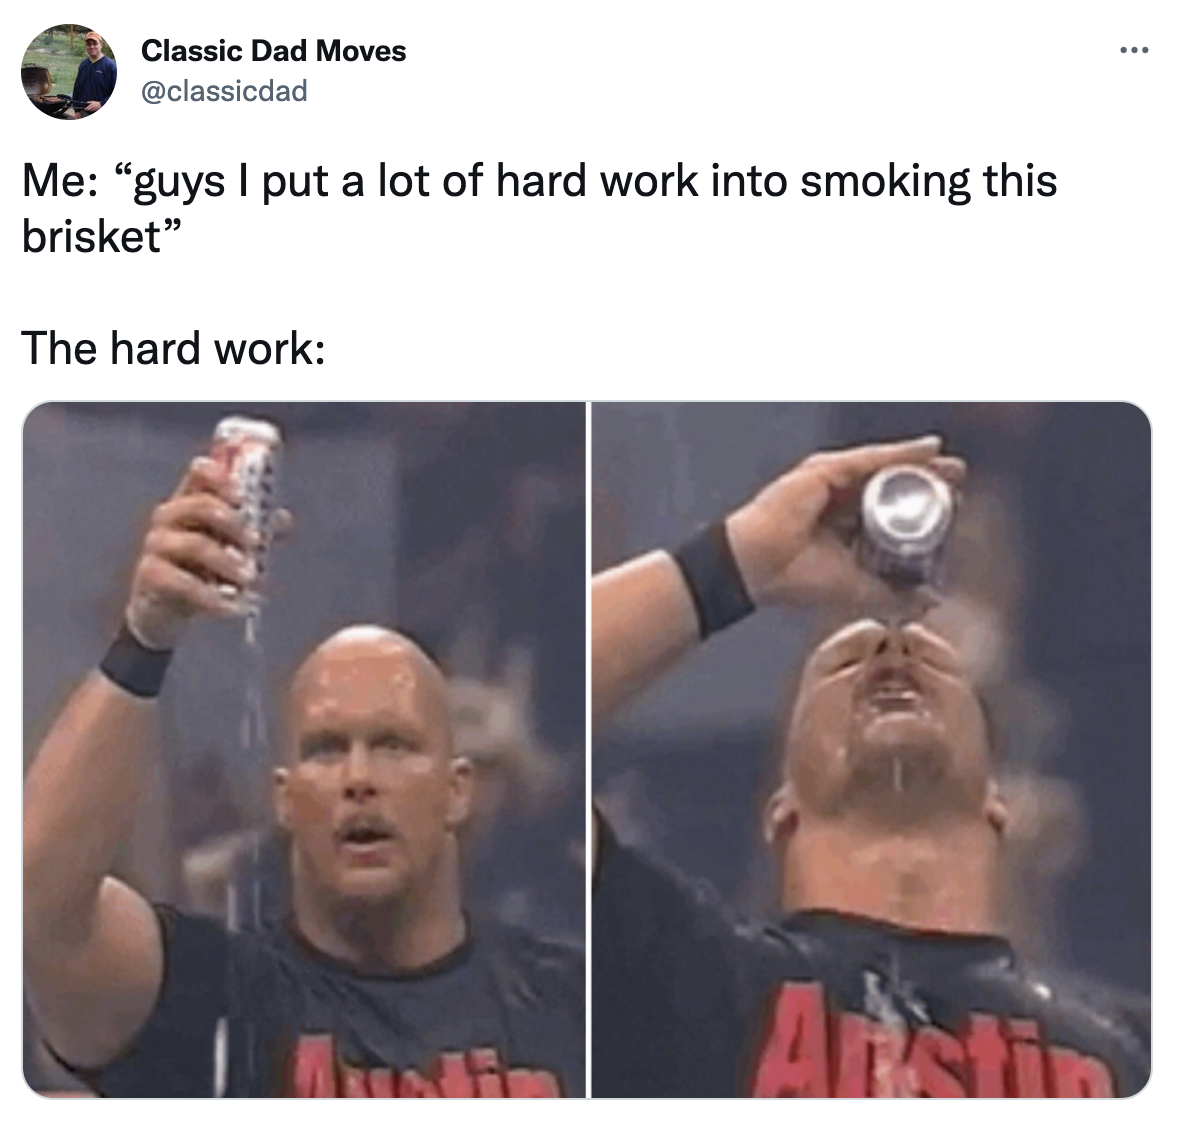 Dank Dad Memes - hand - Classic Dad Moves Me "guys I put a lot of hard work into smoking this brisket" The hard work At